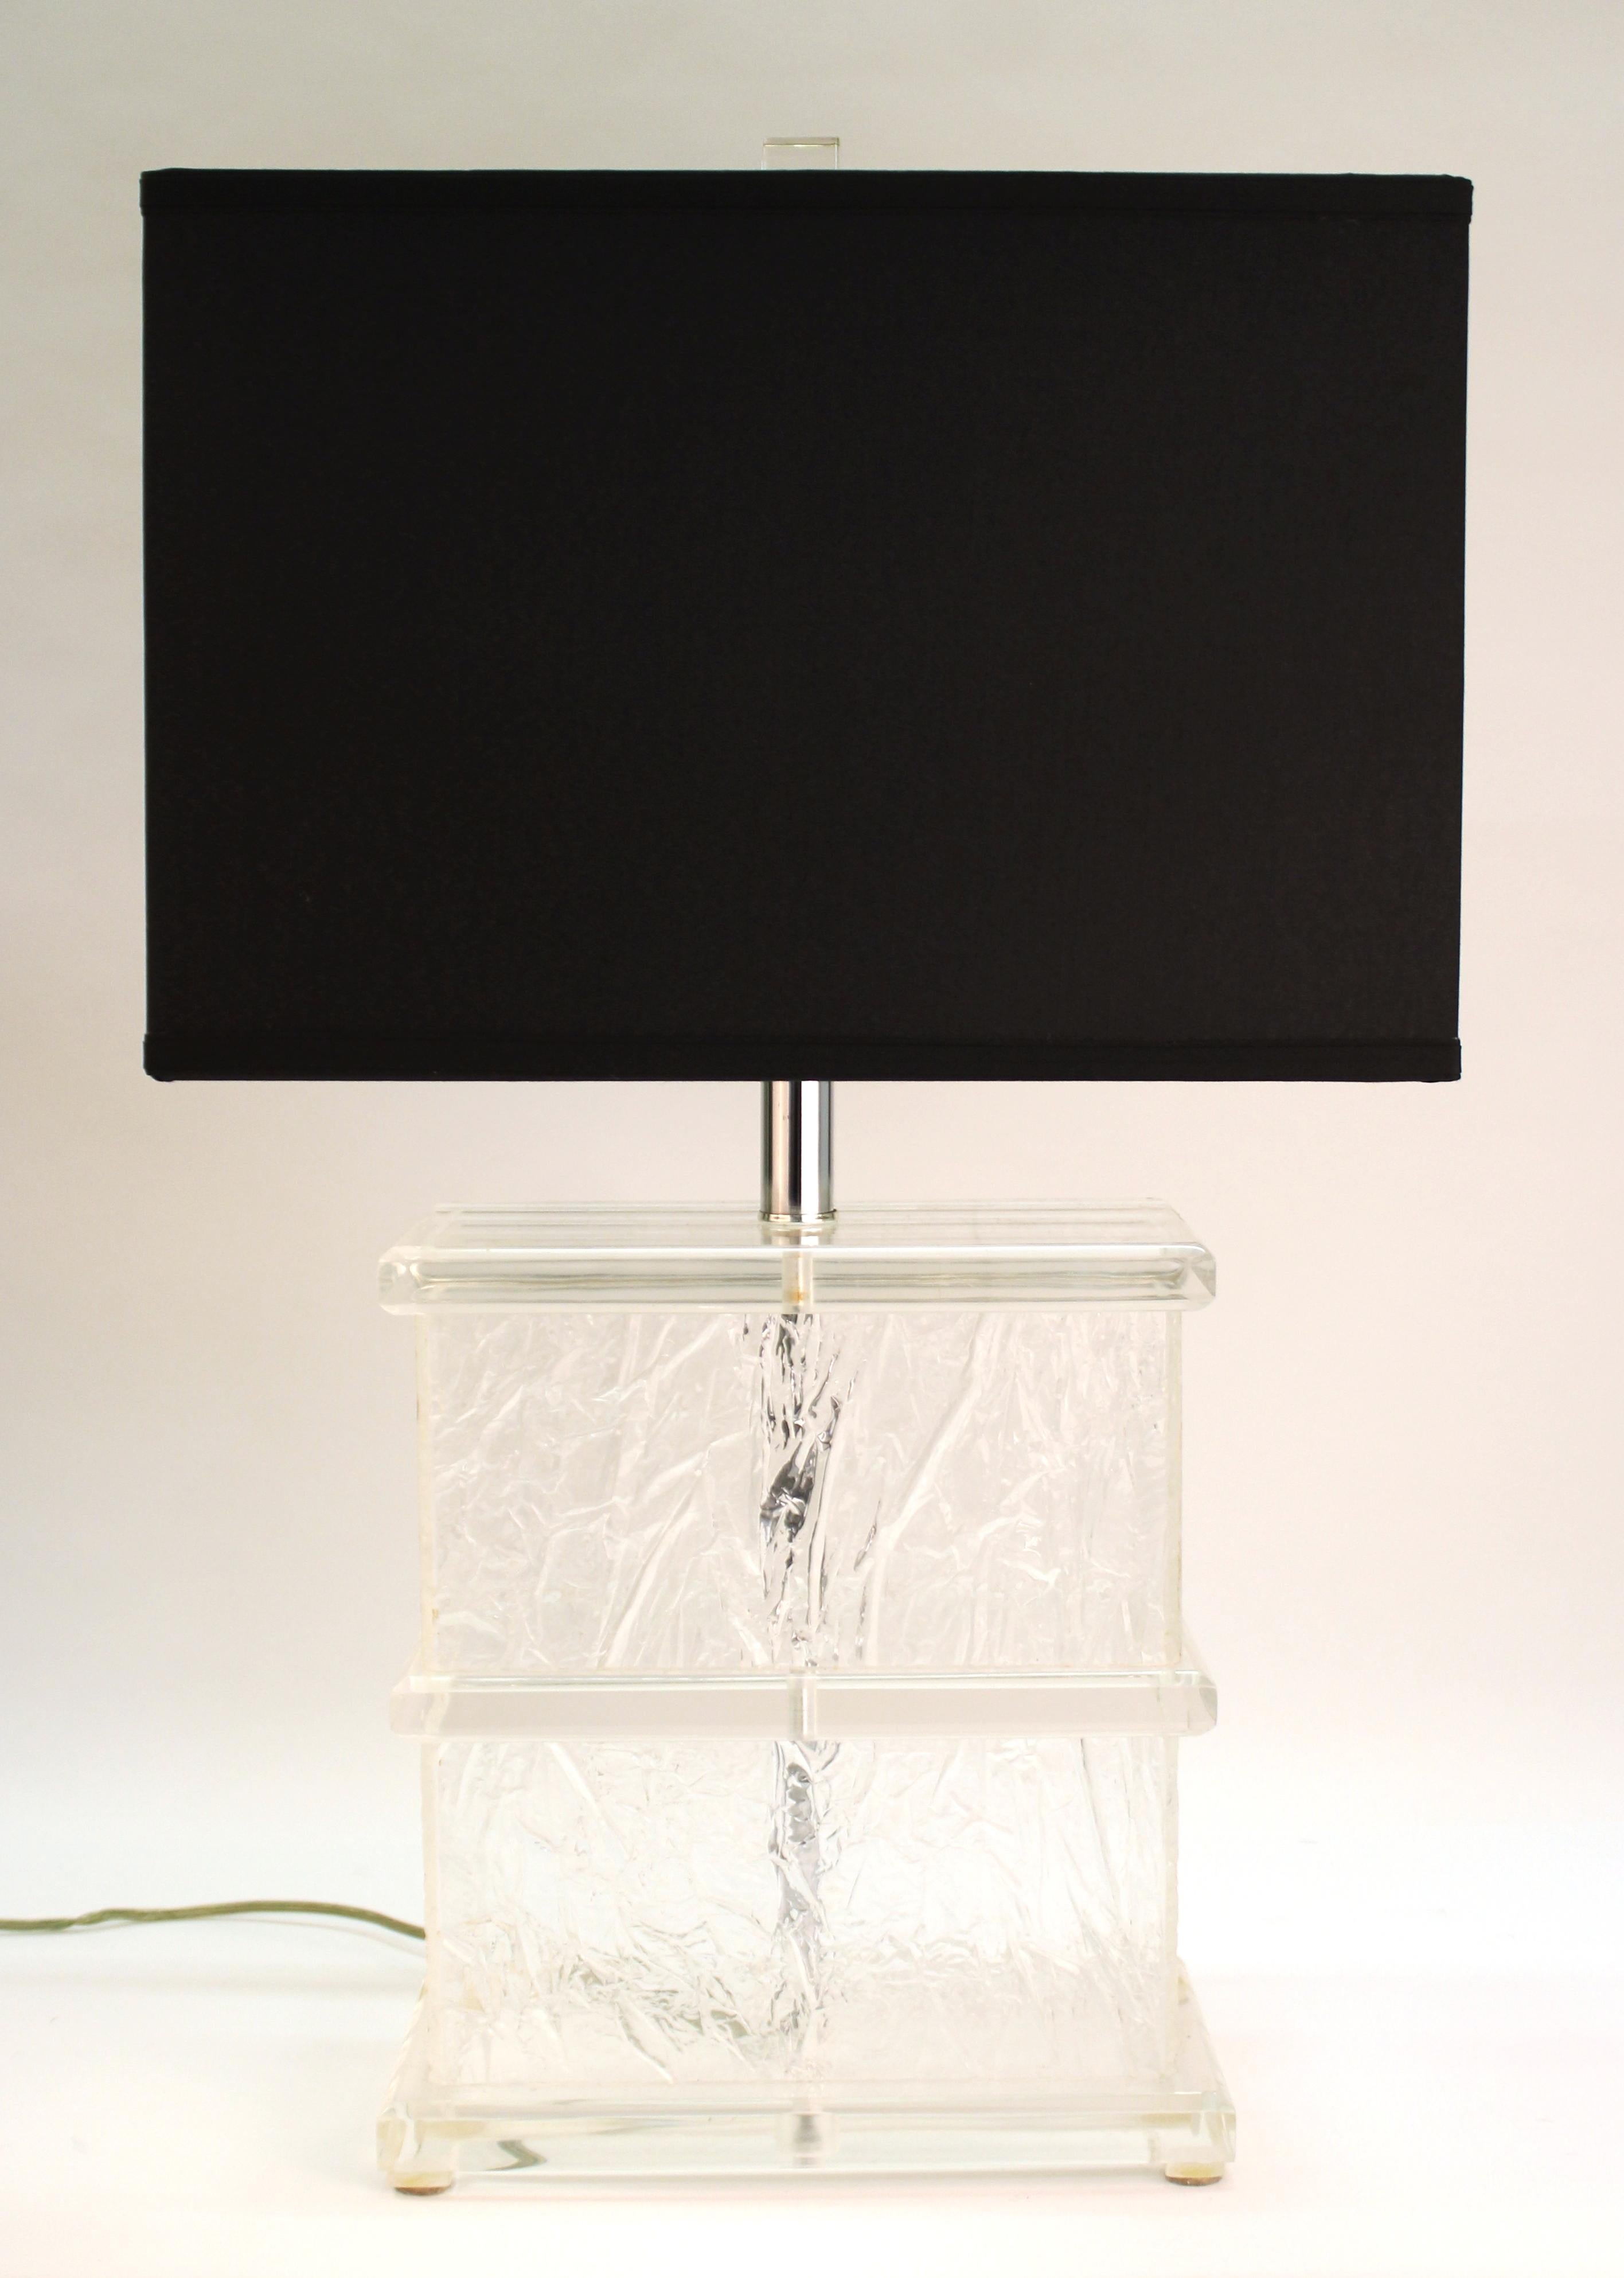 American Mid-Century Modern pair of Lucite crackle table lamps with new black shades and Lucite finials. The pair was made in the United States during the 1970s and is in excellent vintage condition, with new black shades.